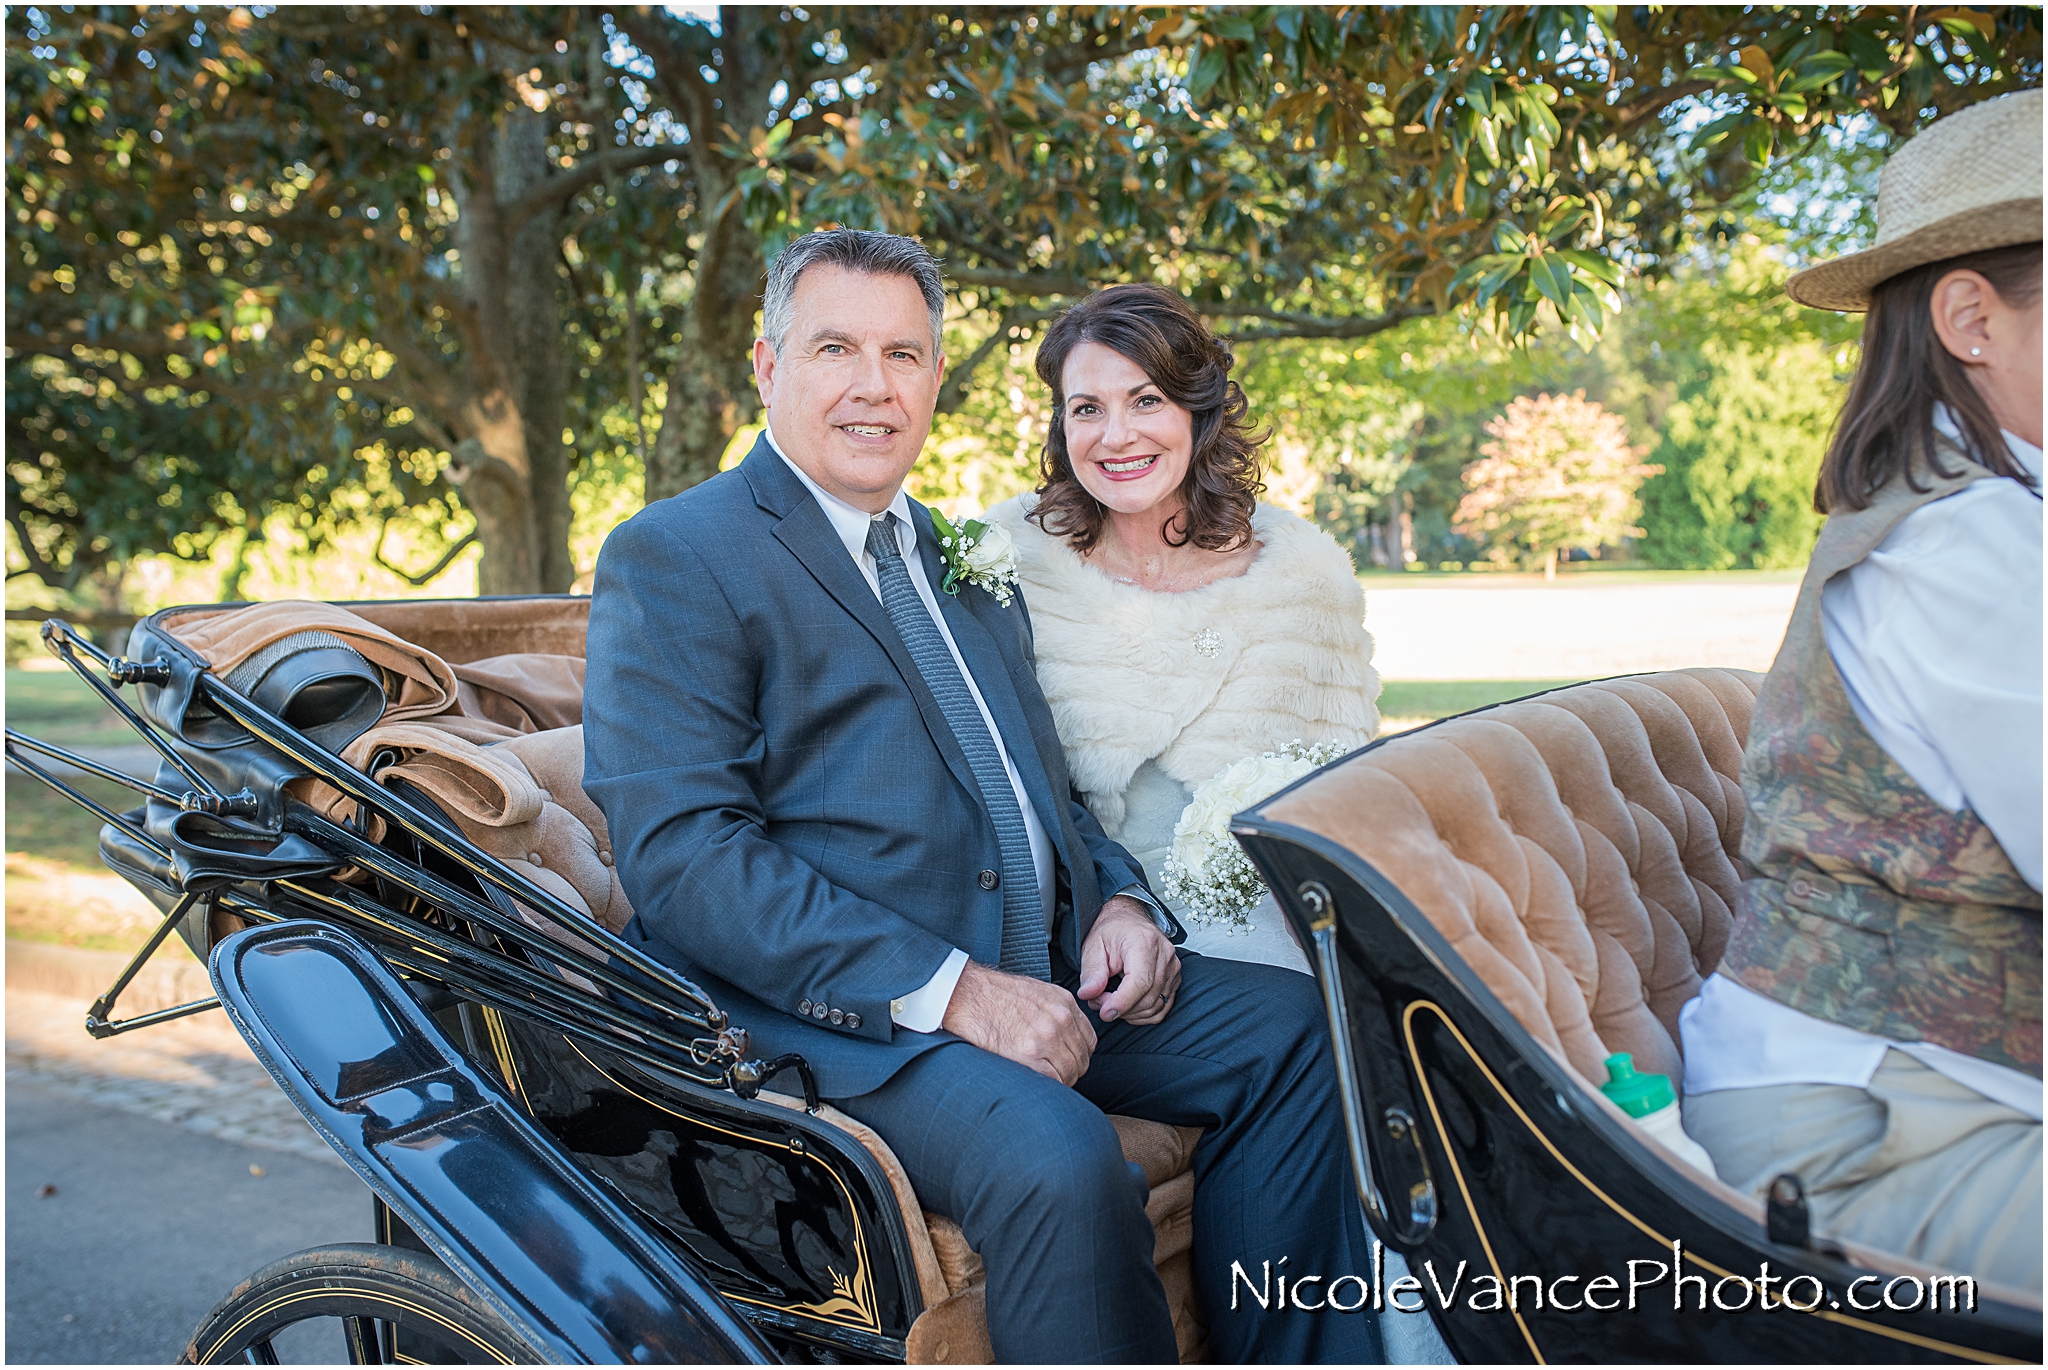 The newlyweds enjoy a carriage ride around the park together directly after their wedding at Maymont Park.